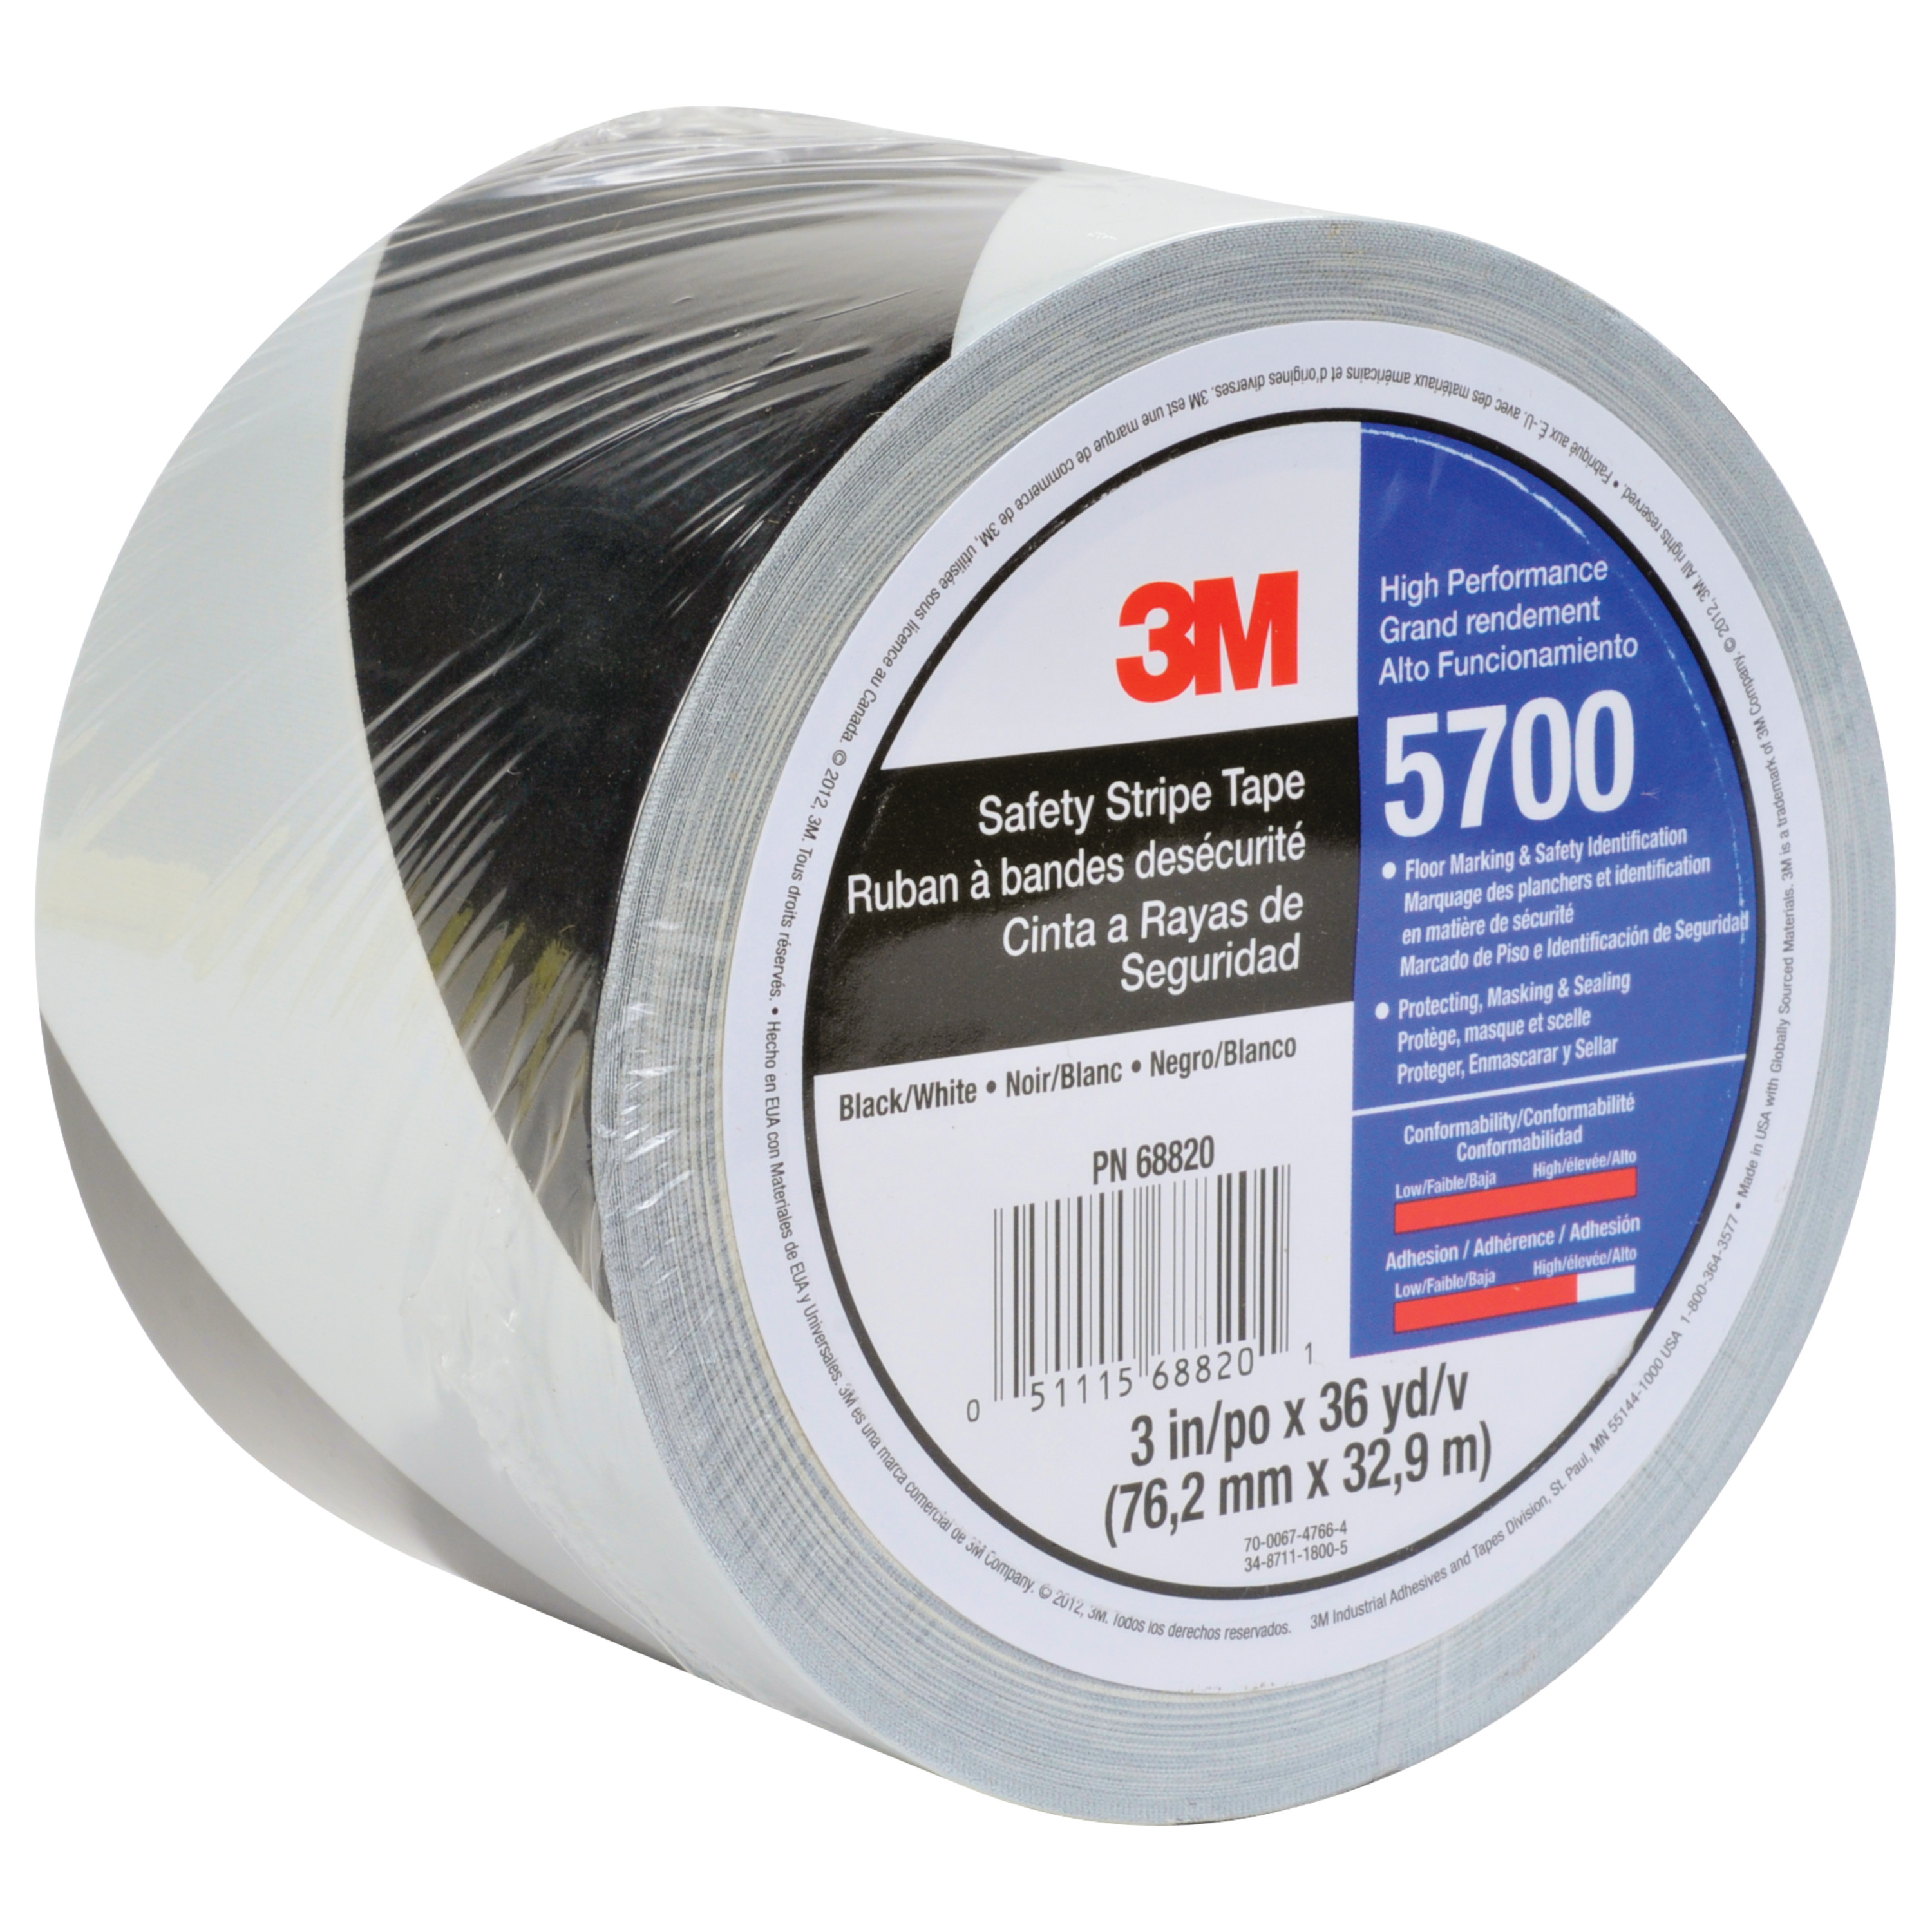 3M™ Safety Stripe Vinyl Tape 5700, Black/White, 3 in x 36 yd, 5.4 mil, 12 Roll/Case, Individually Wrapped Conveniently Packaged